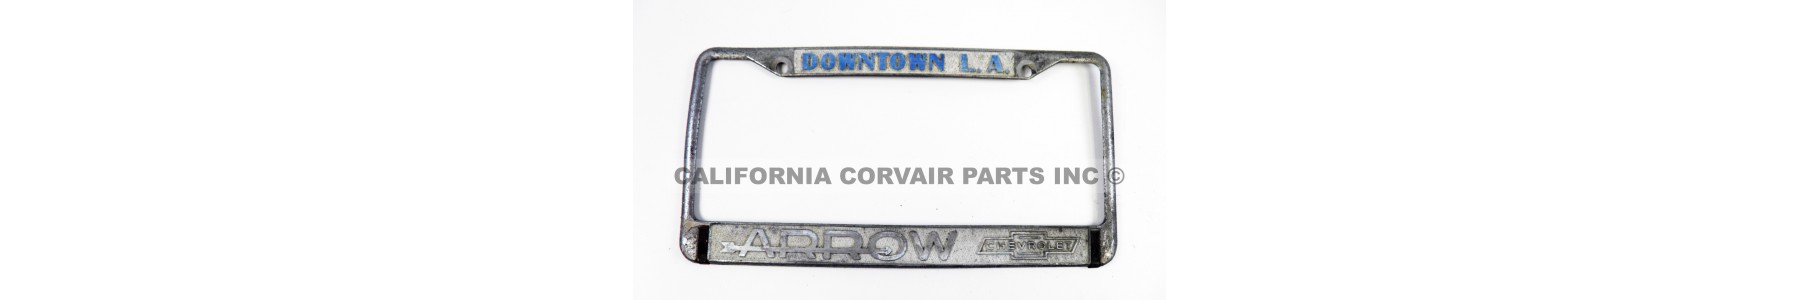 USED LICENSE PLATE PARTS